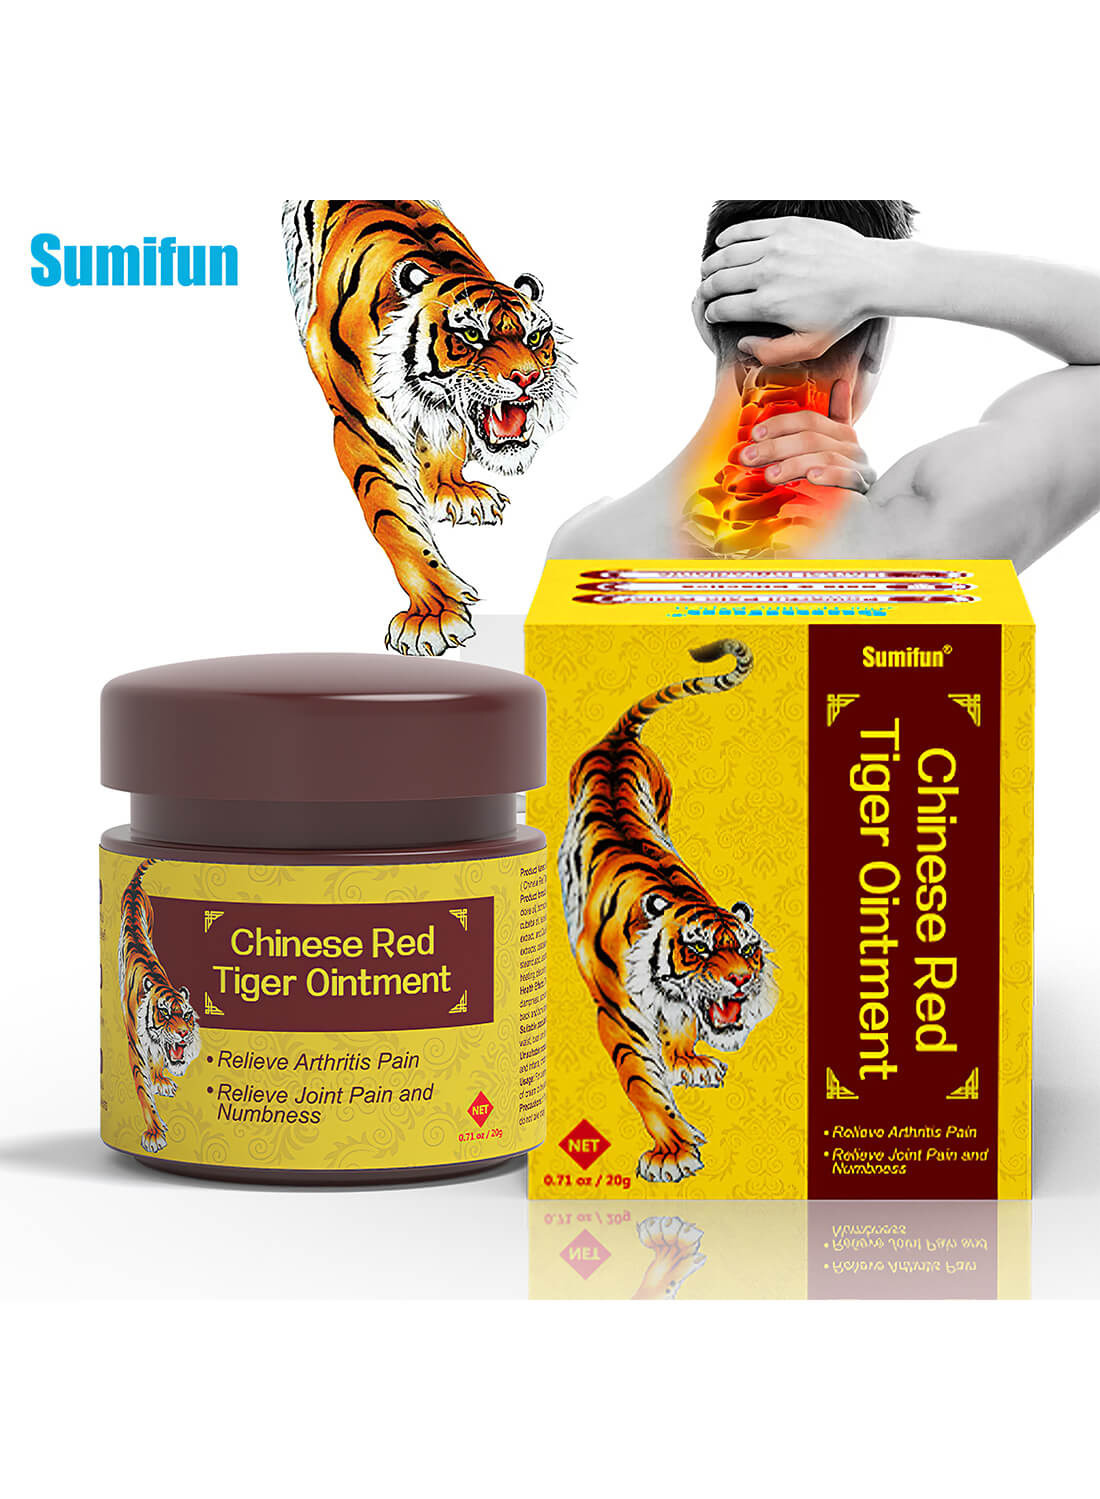 Sumifun Chinese Red Tiger Ointment 20g